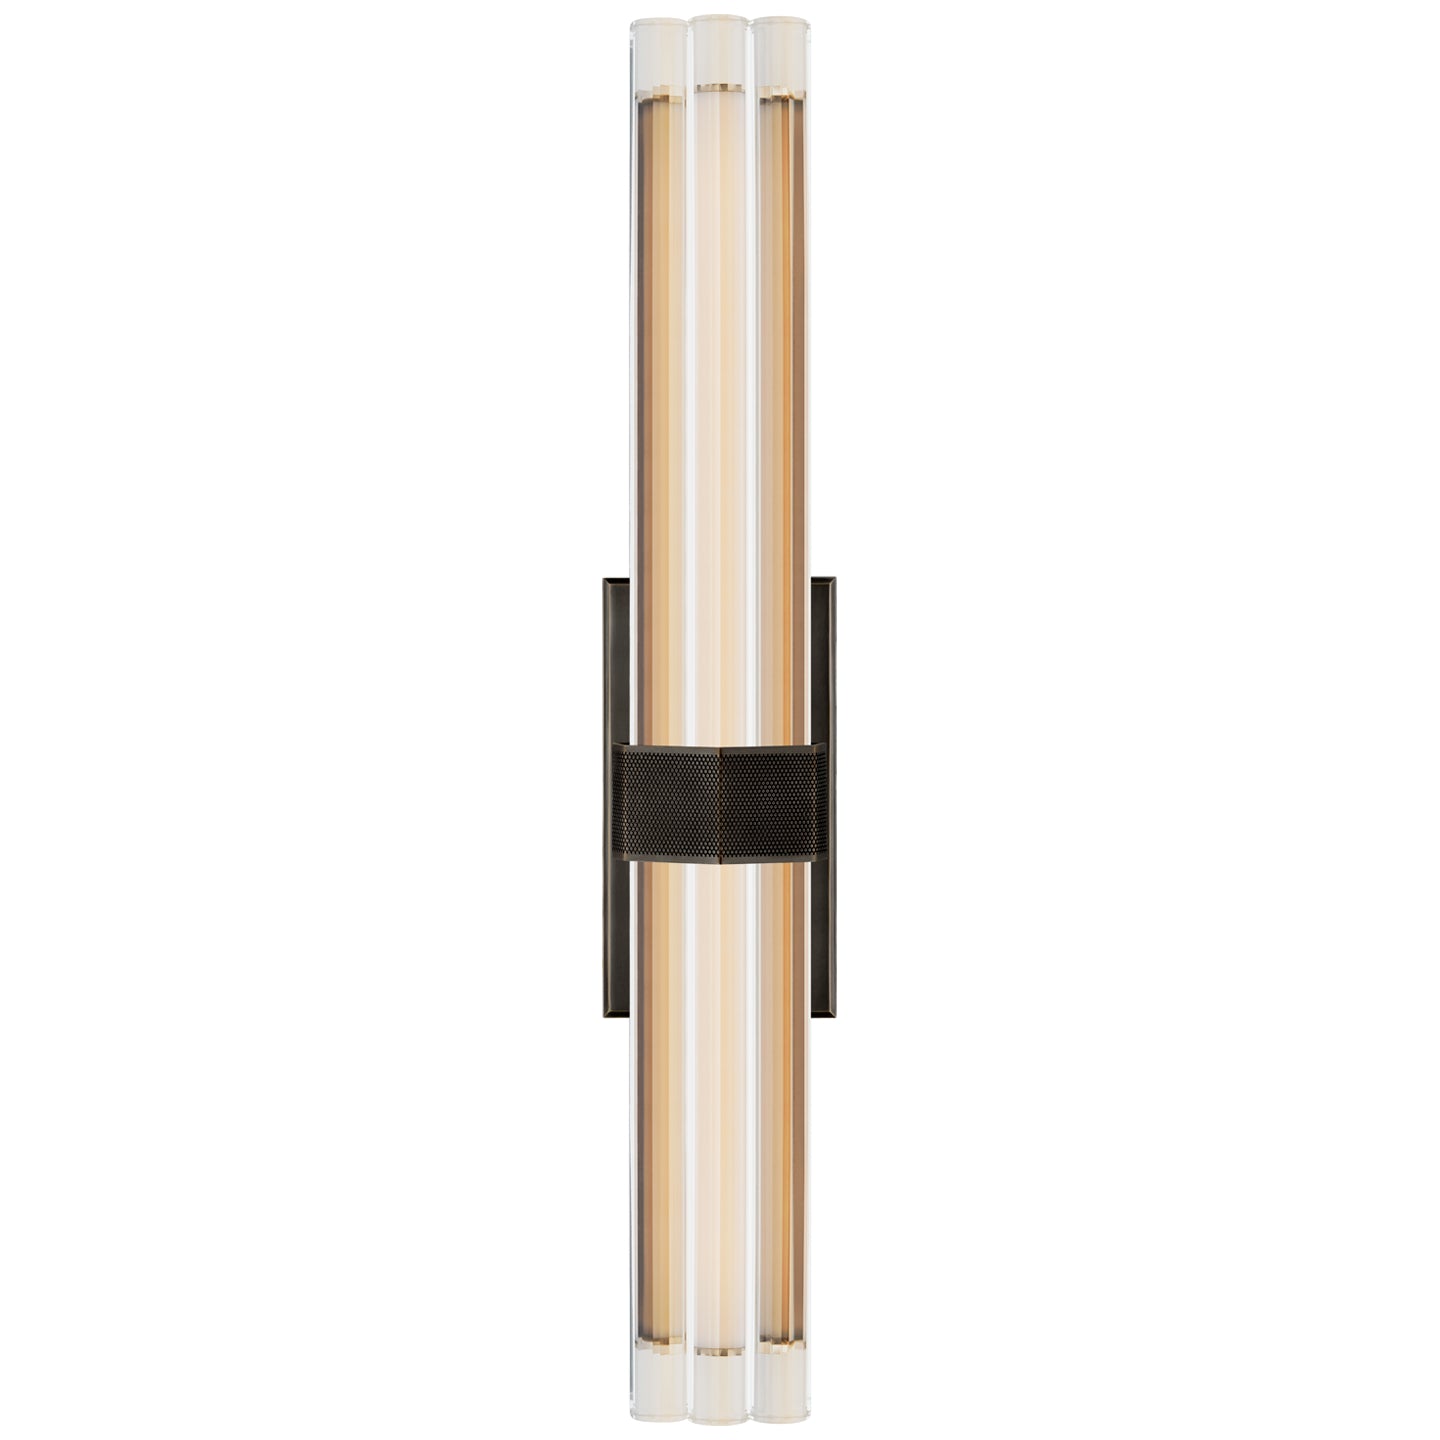 Load image into Gallery viewer, Visual Comfort Signature - LR 2910BZ-CG - LED Wall Sconce - Fascio - Bronze
